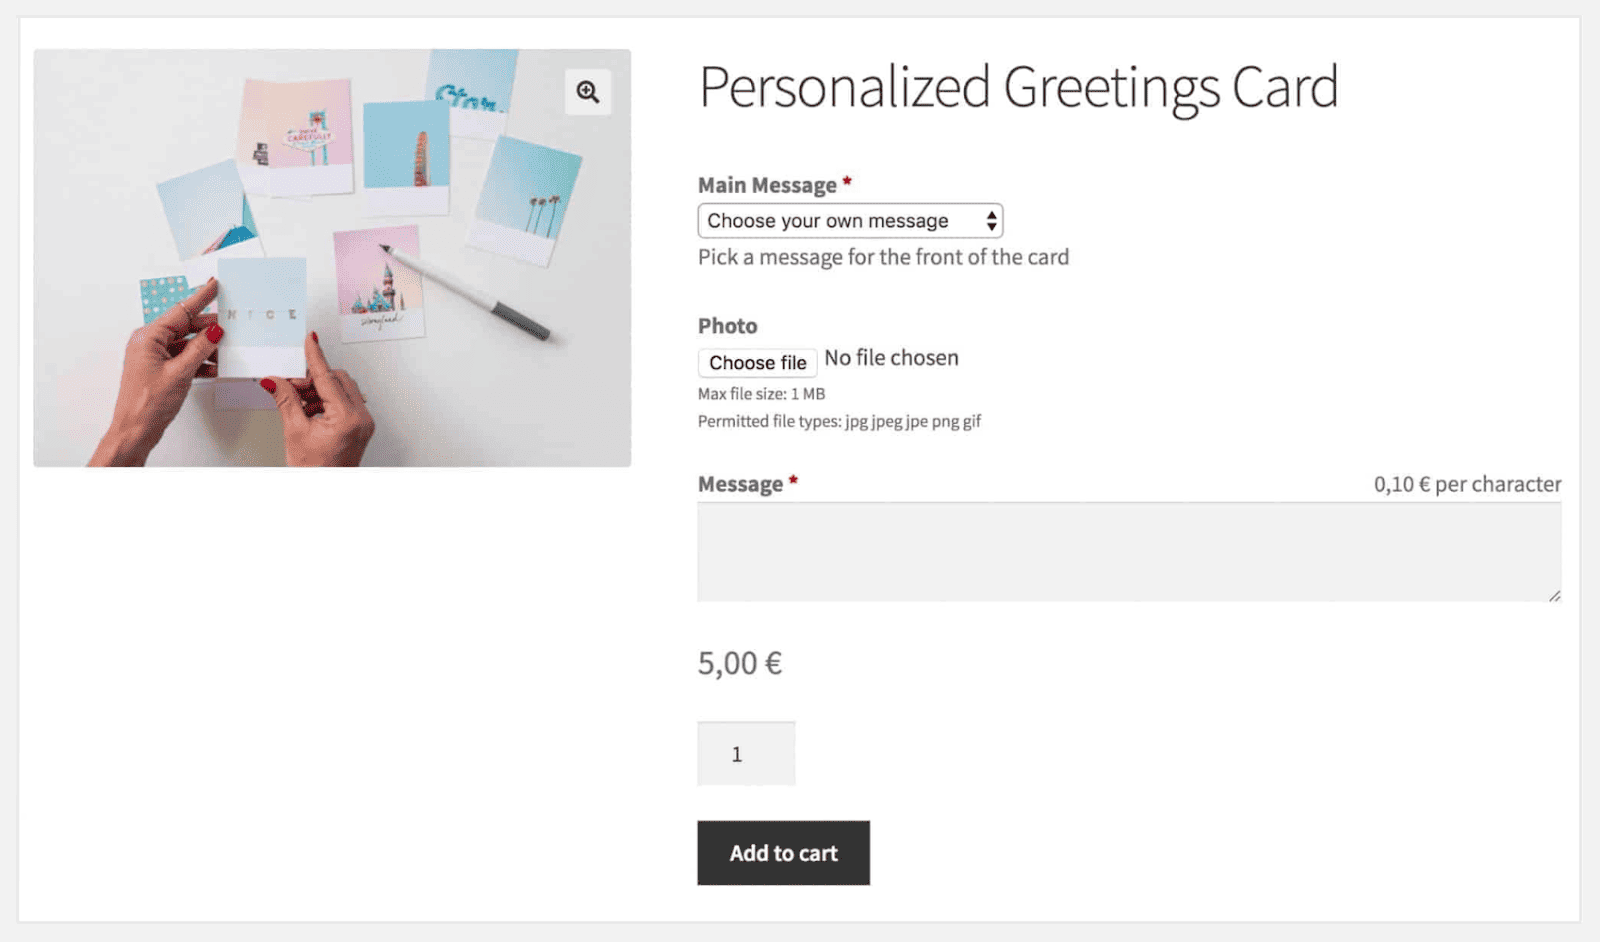 A product listing in an online store inviting the customer to personalize their greeting card by submitting their own text.